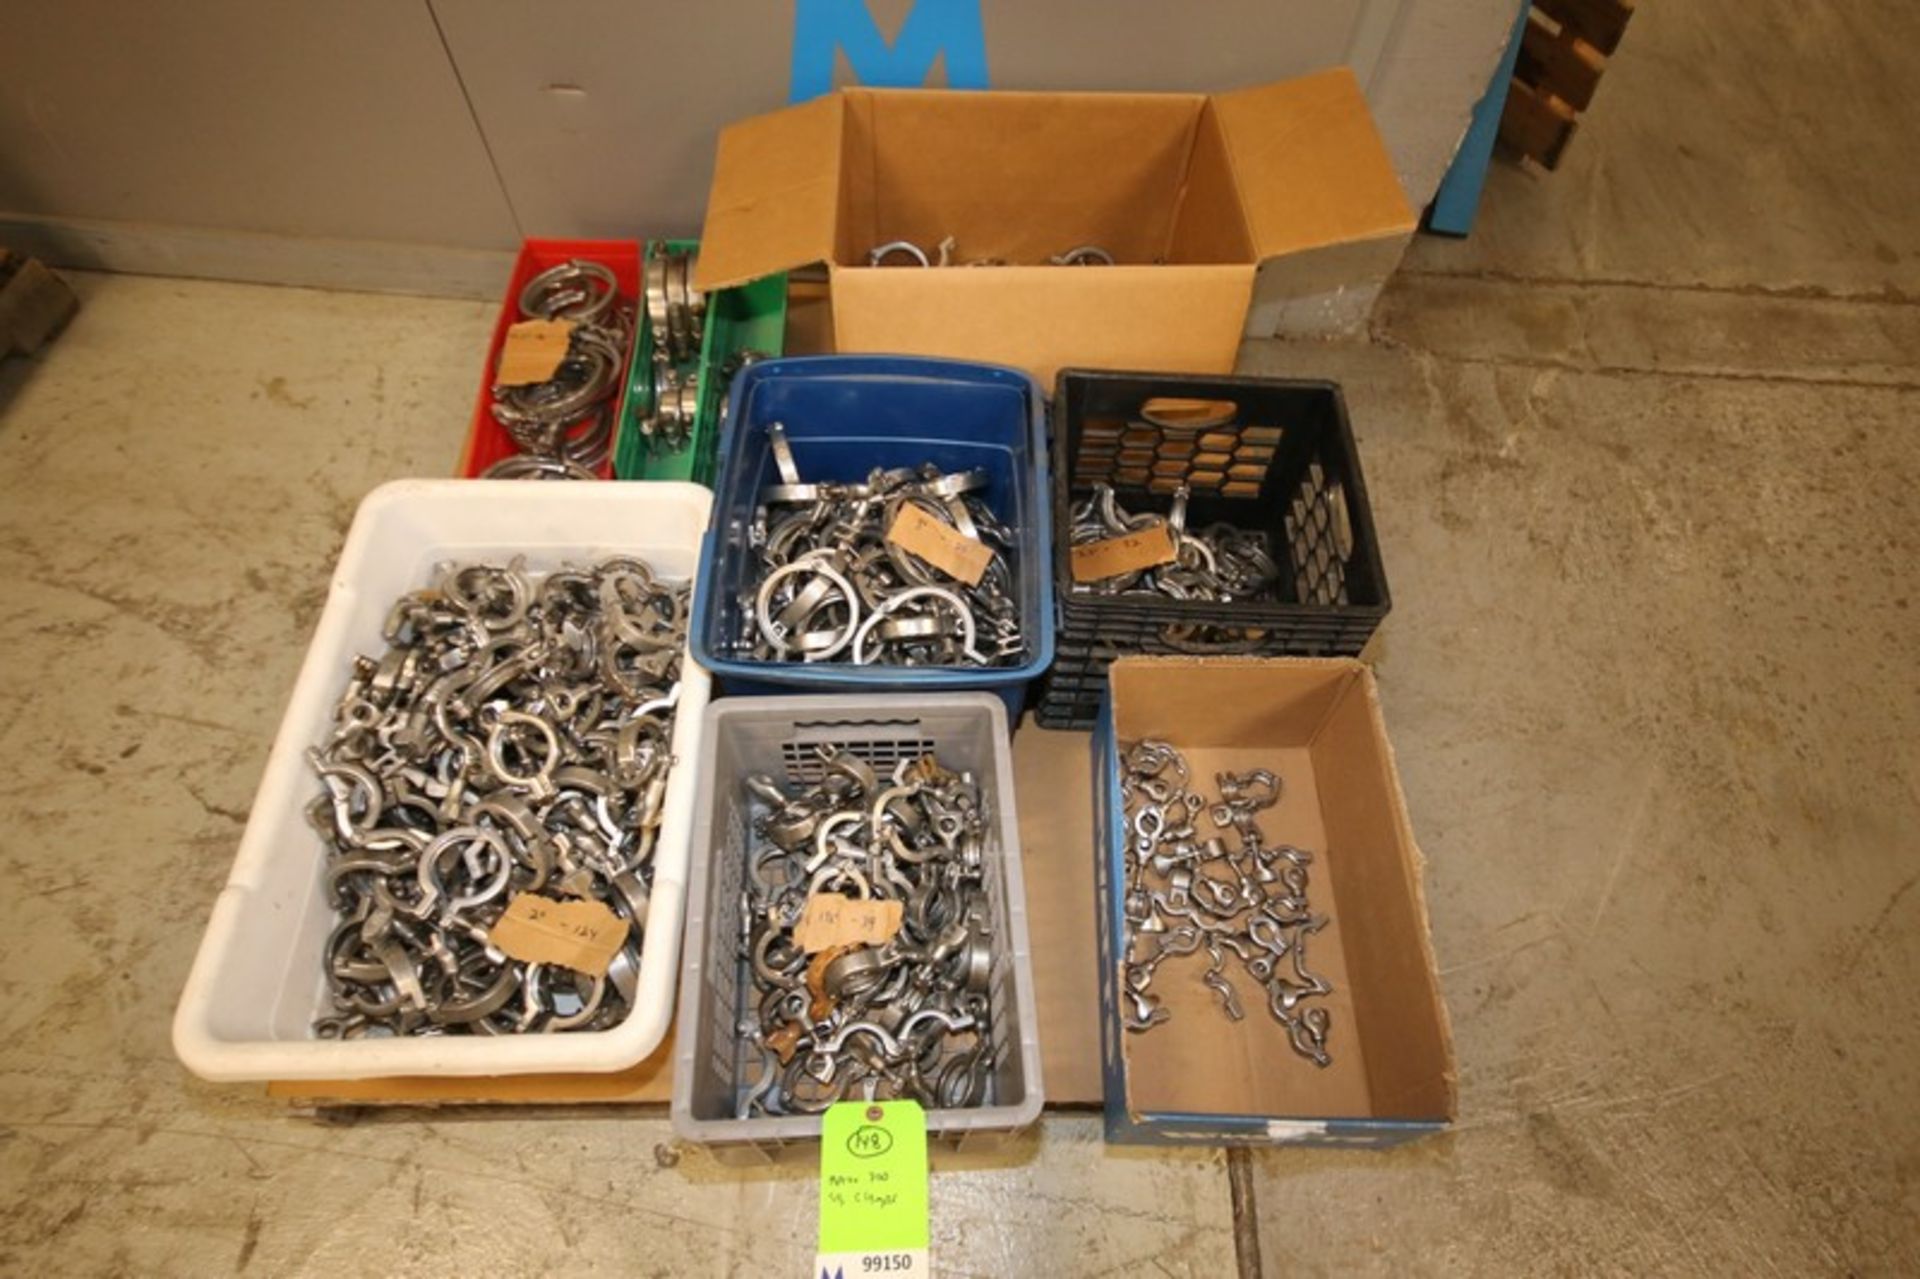 Aprox. 300 - 1", 1.5", 2.5", 3" & 4" Assorted S/S Clamps, Includes a Box Broke or Missing Parts